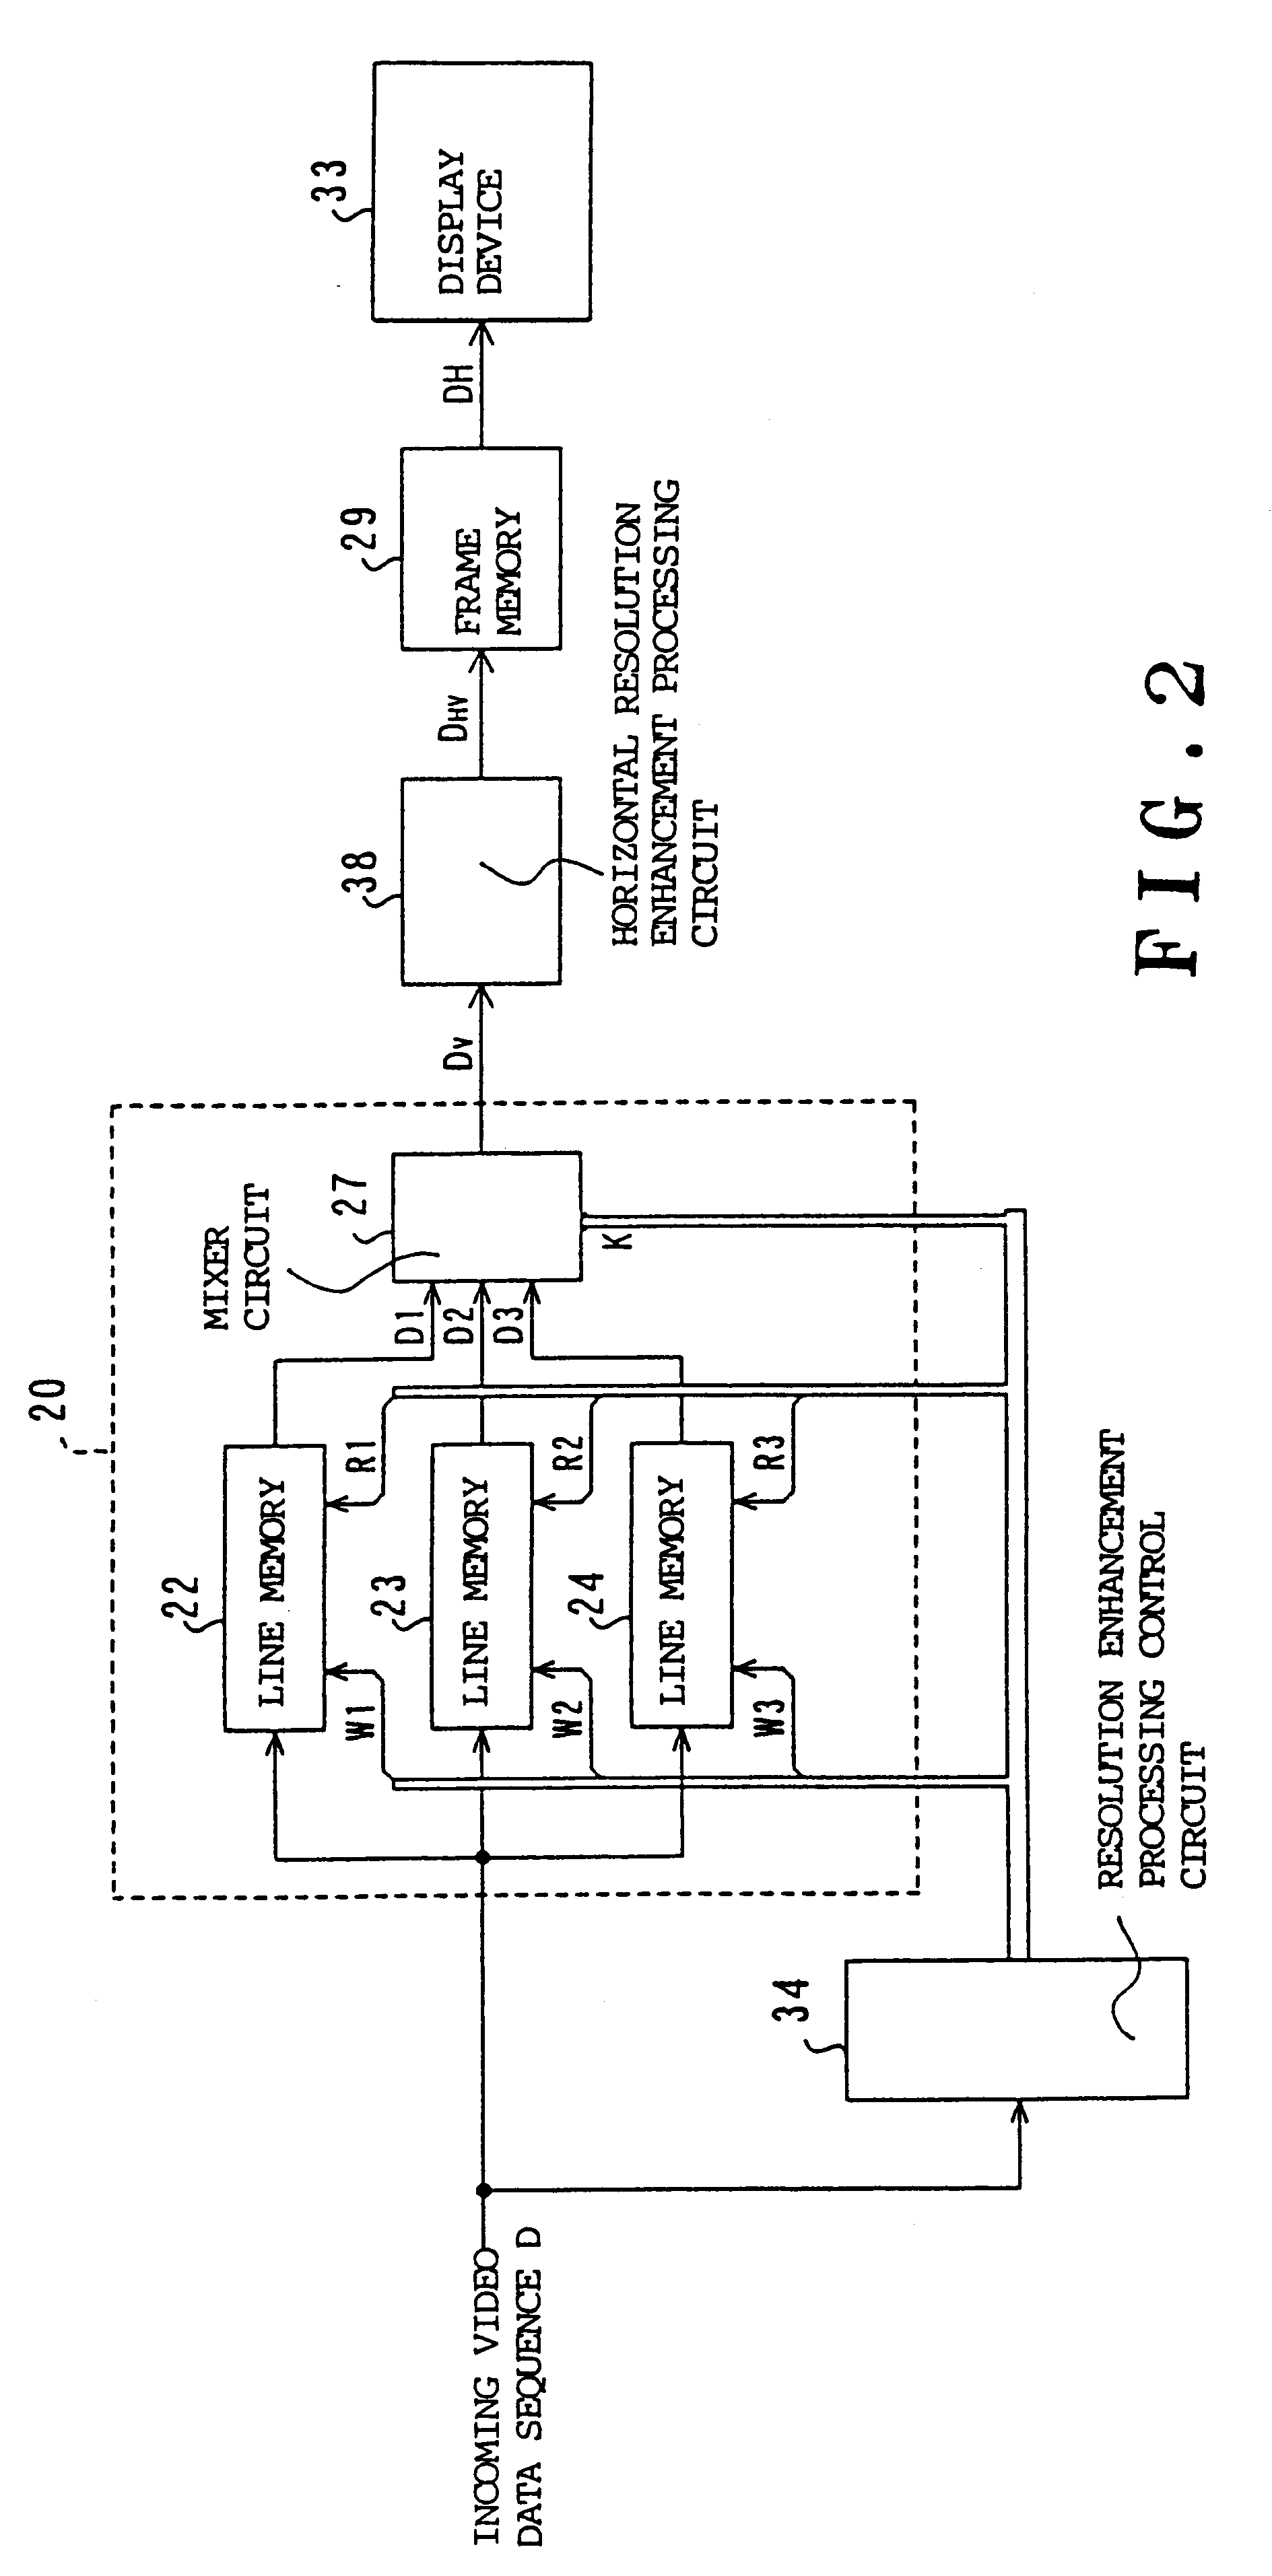 Video signal processing apparatus with resolution enhancing feature